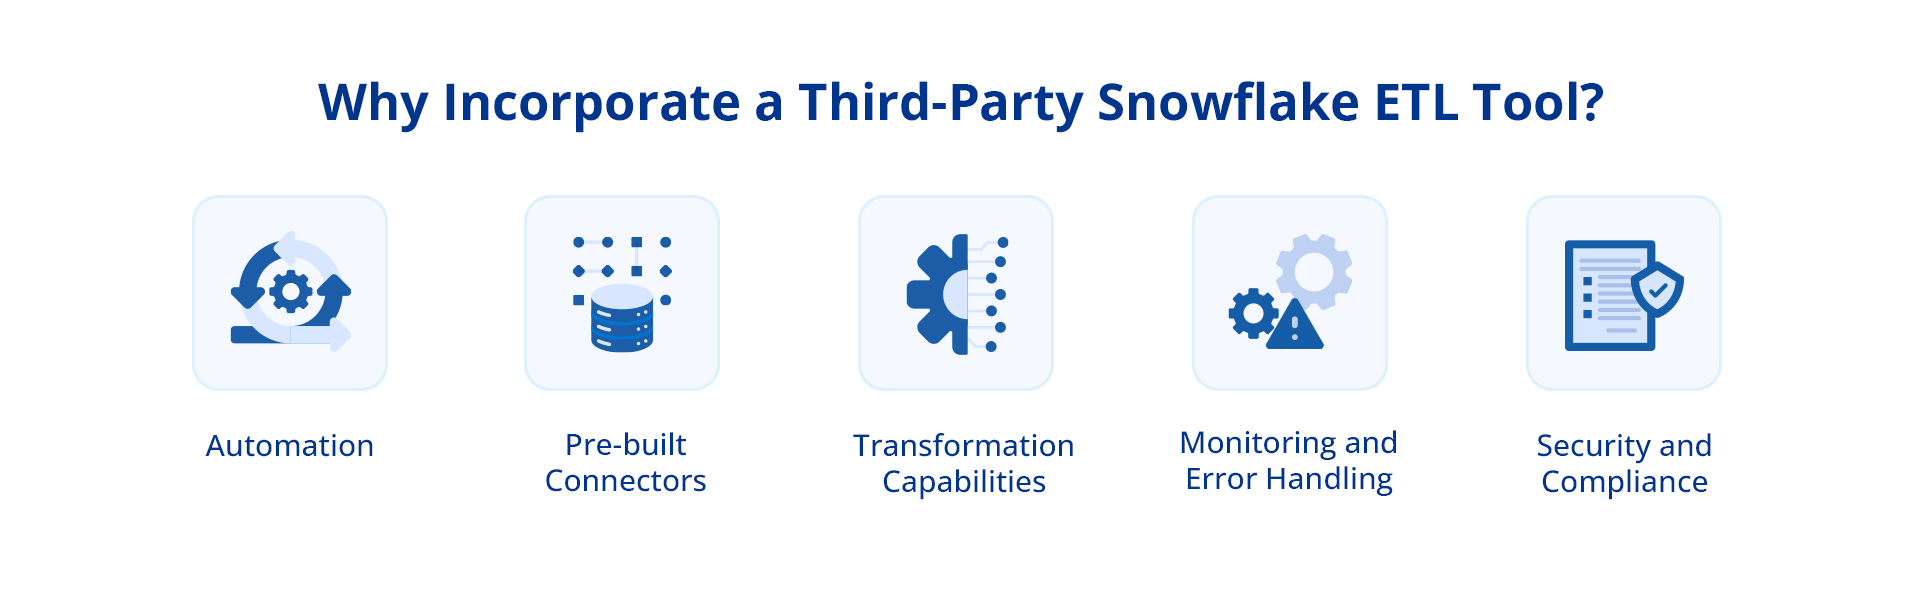 Reasons to incorporate third party snowflake ETL tool